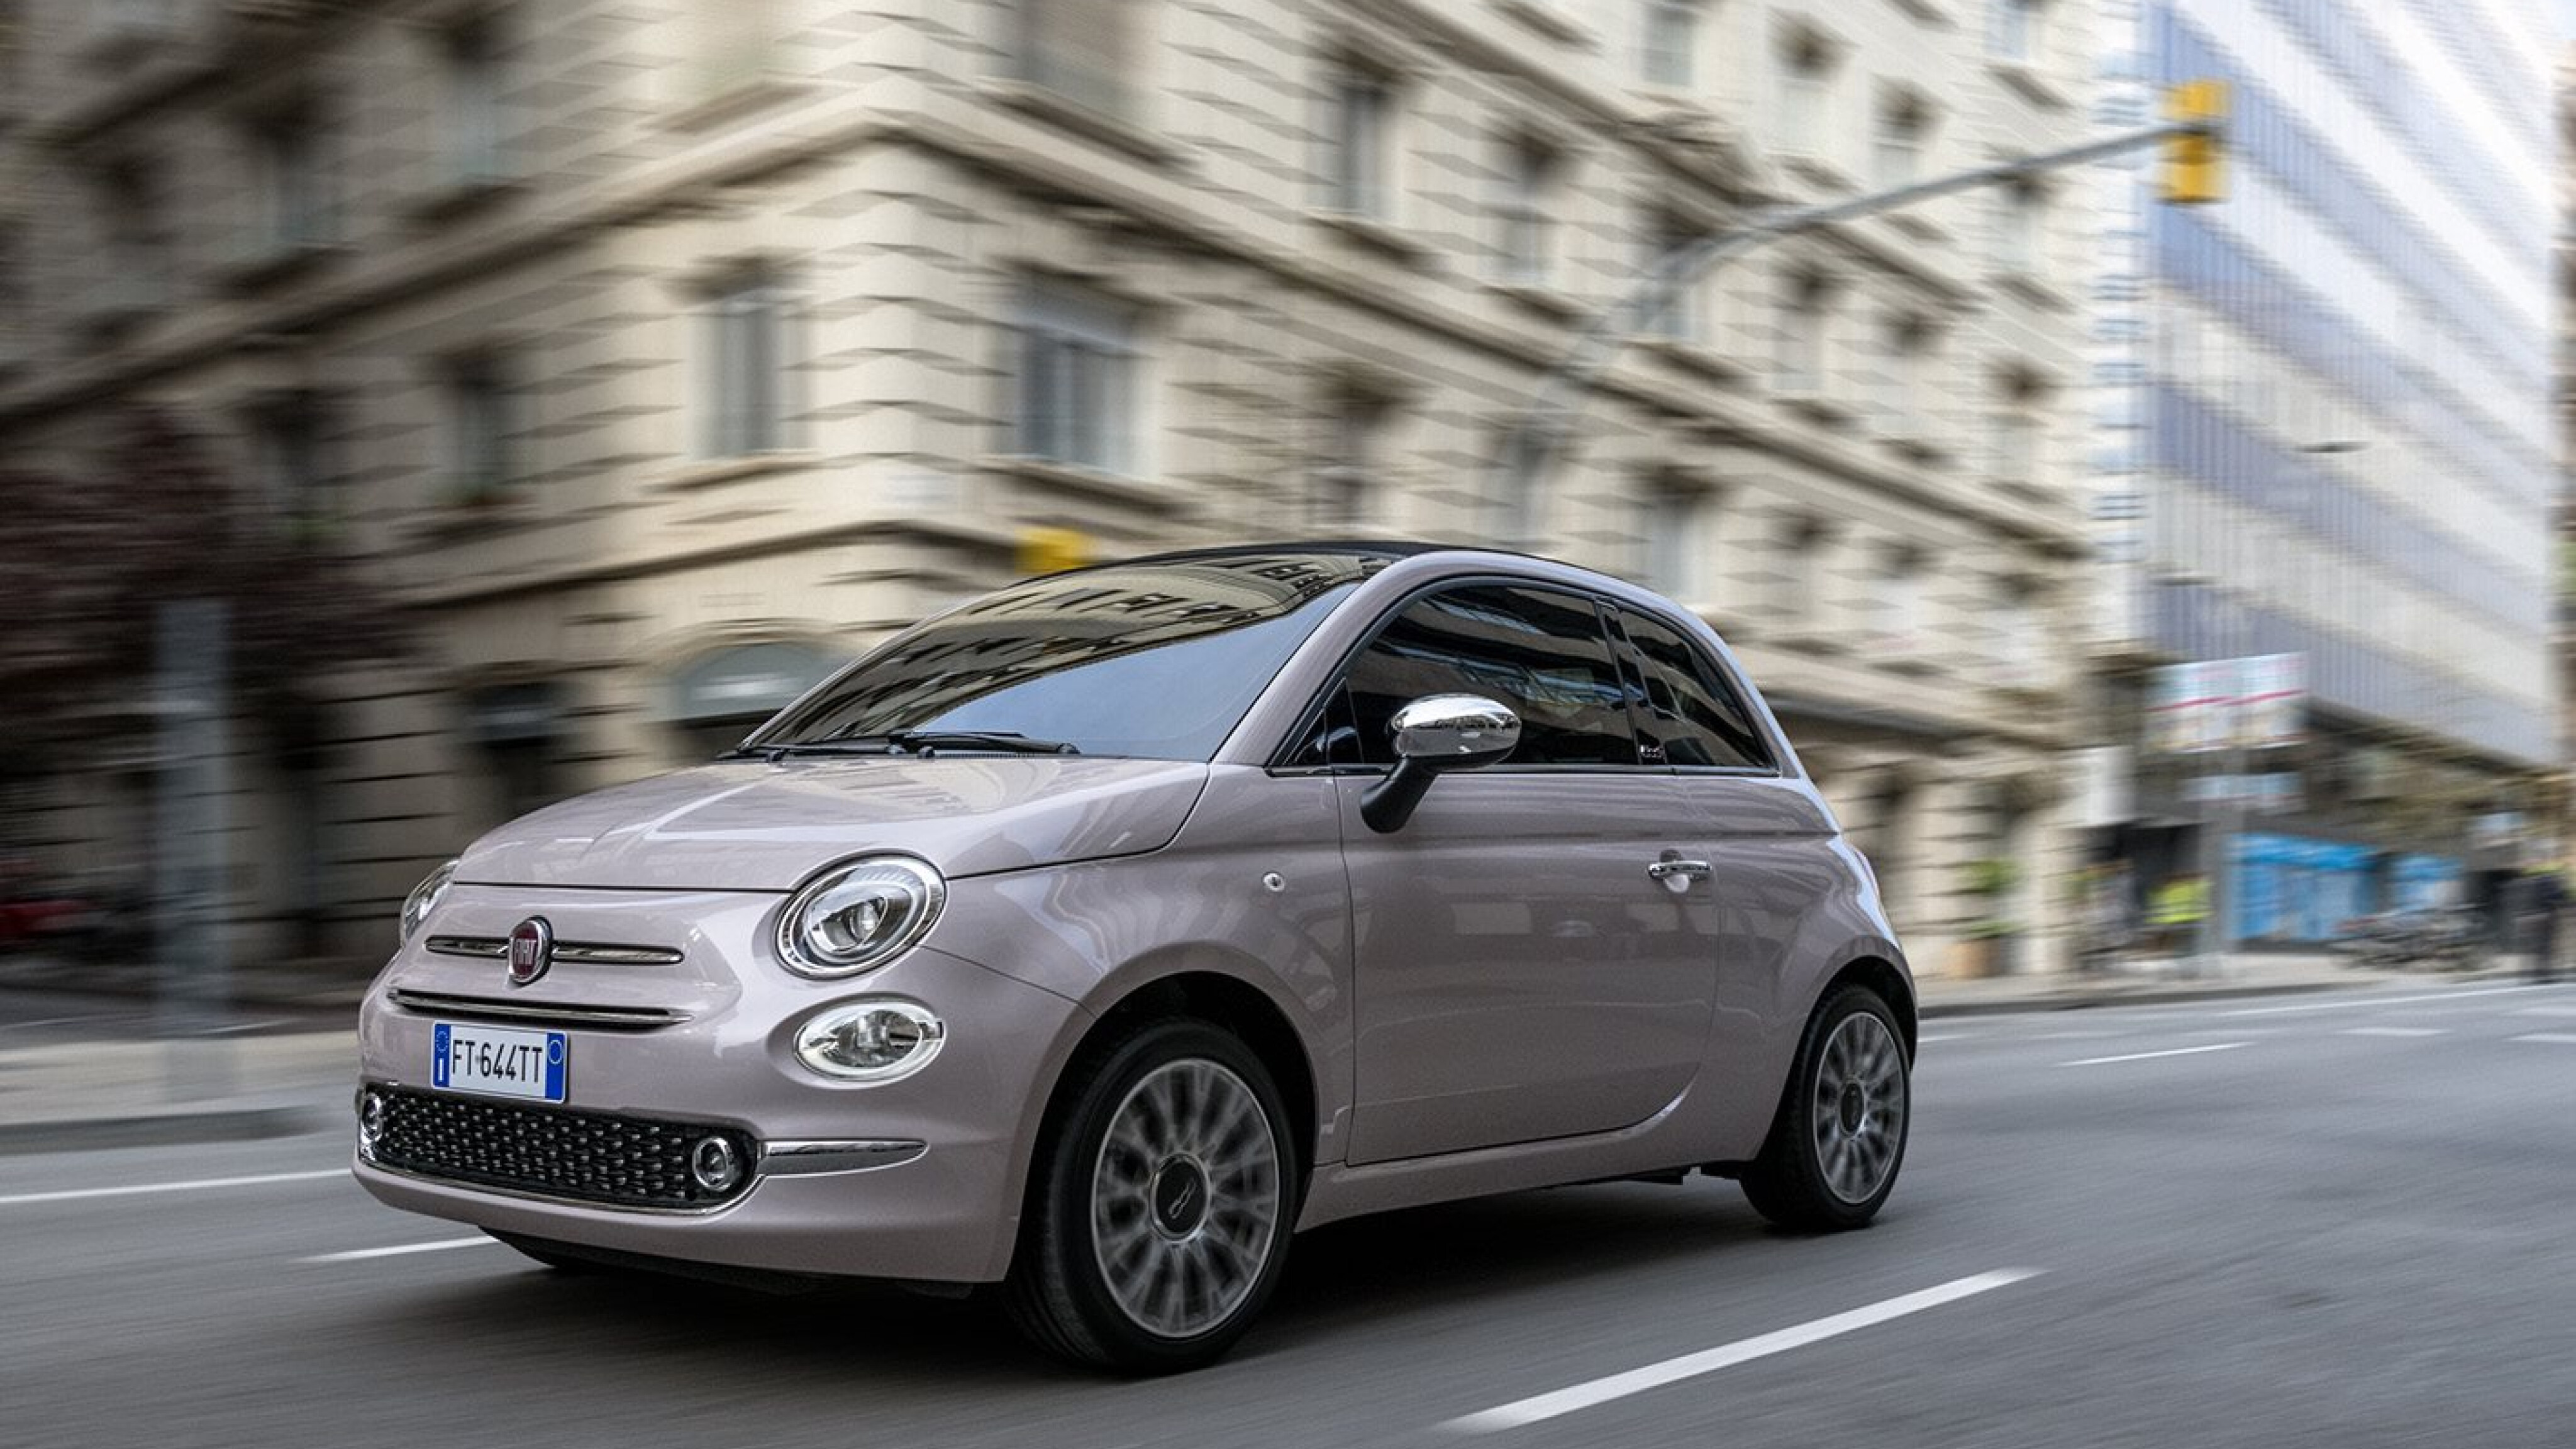 Fiat 500, Abarth 595 2020 review